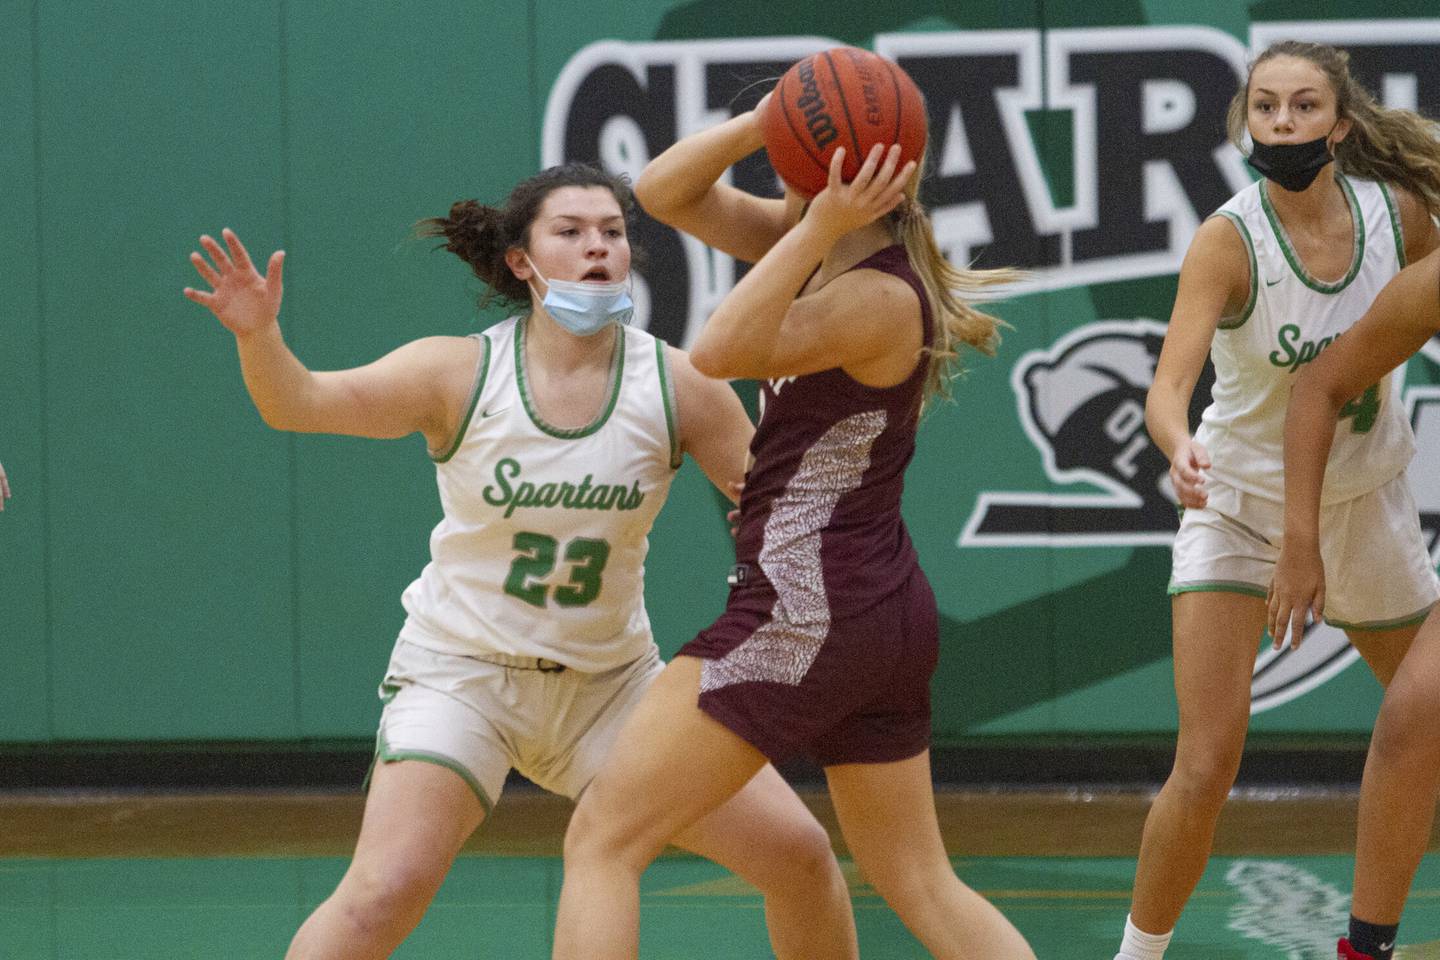 Oak Lawn's Mia Kennelly (23) clamps down on defense against Lockport's Angelica Bafia during a nonconference game on Saturday Dec. 18, 2021.